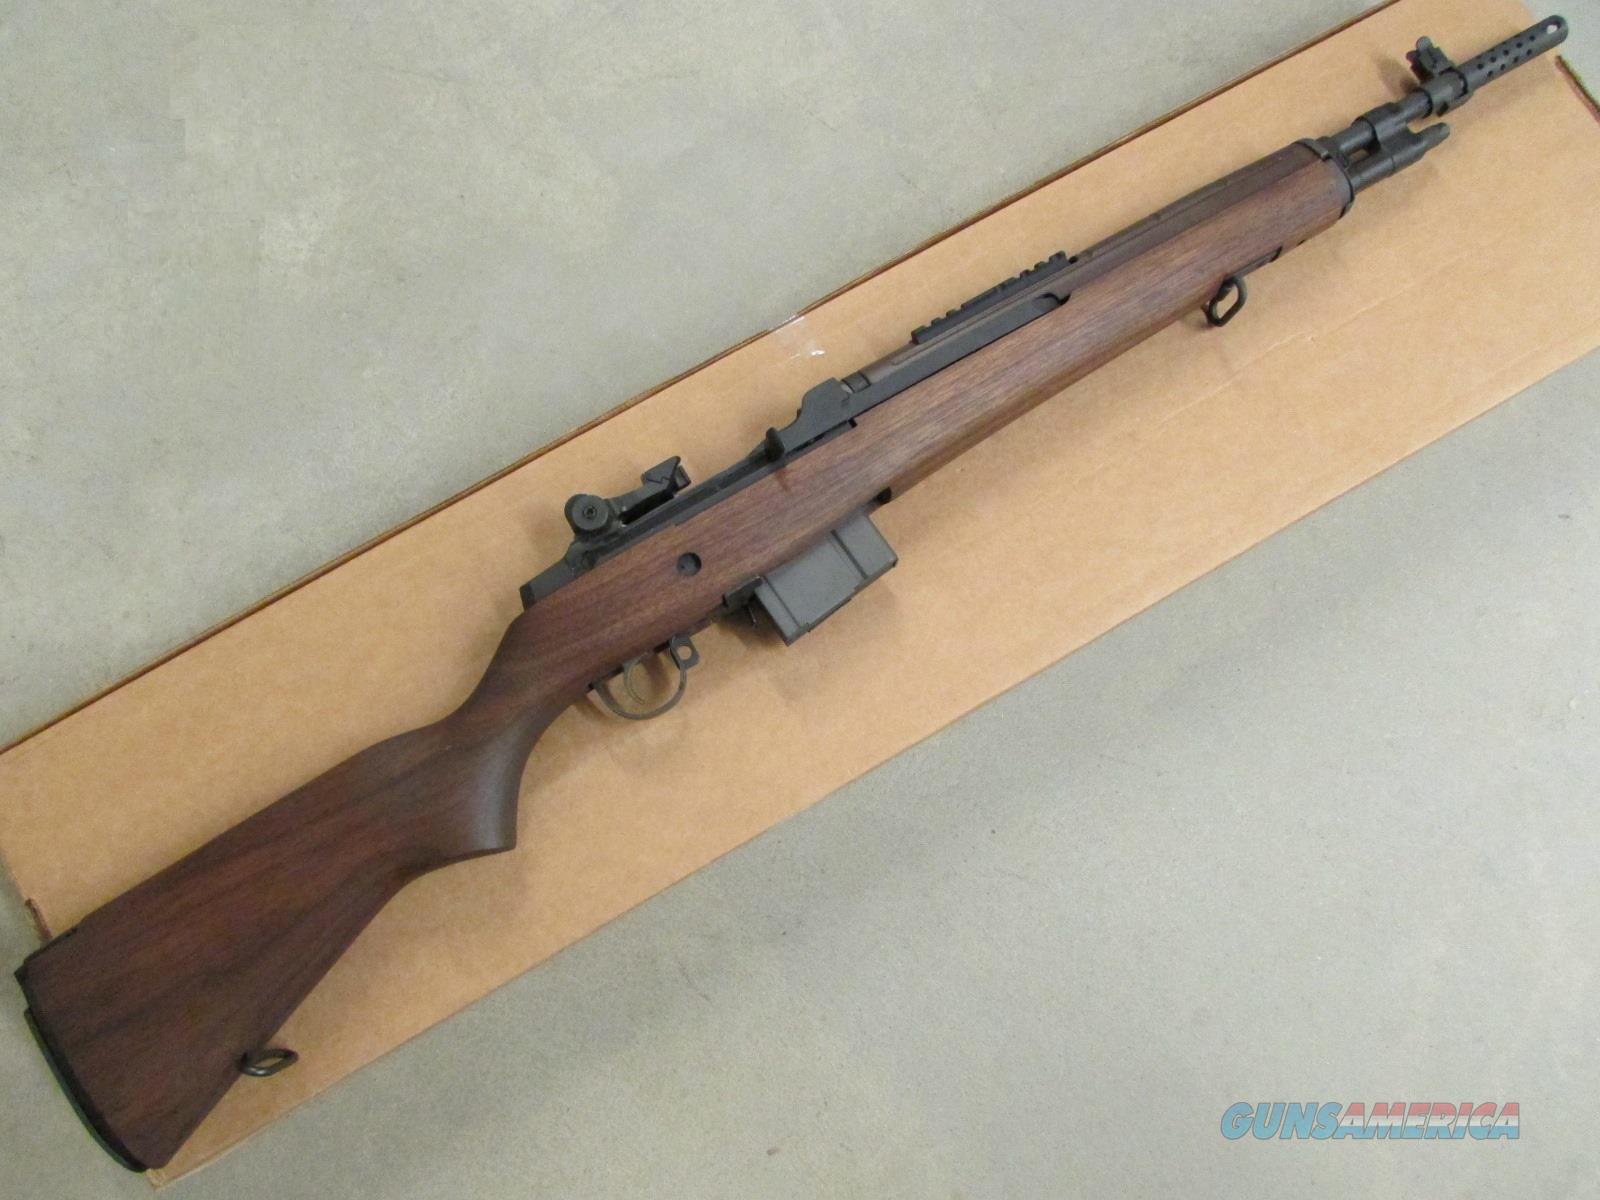 walnut stock for m1a scout